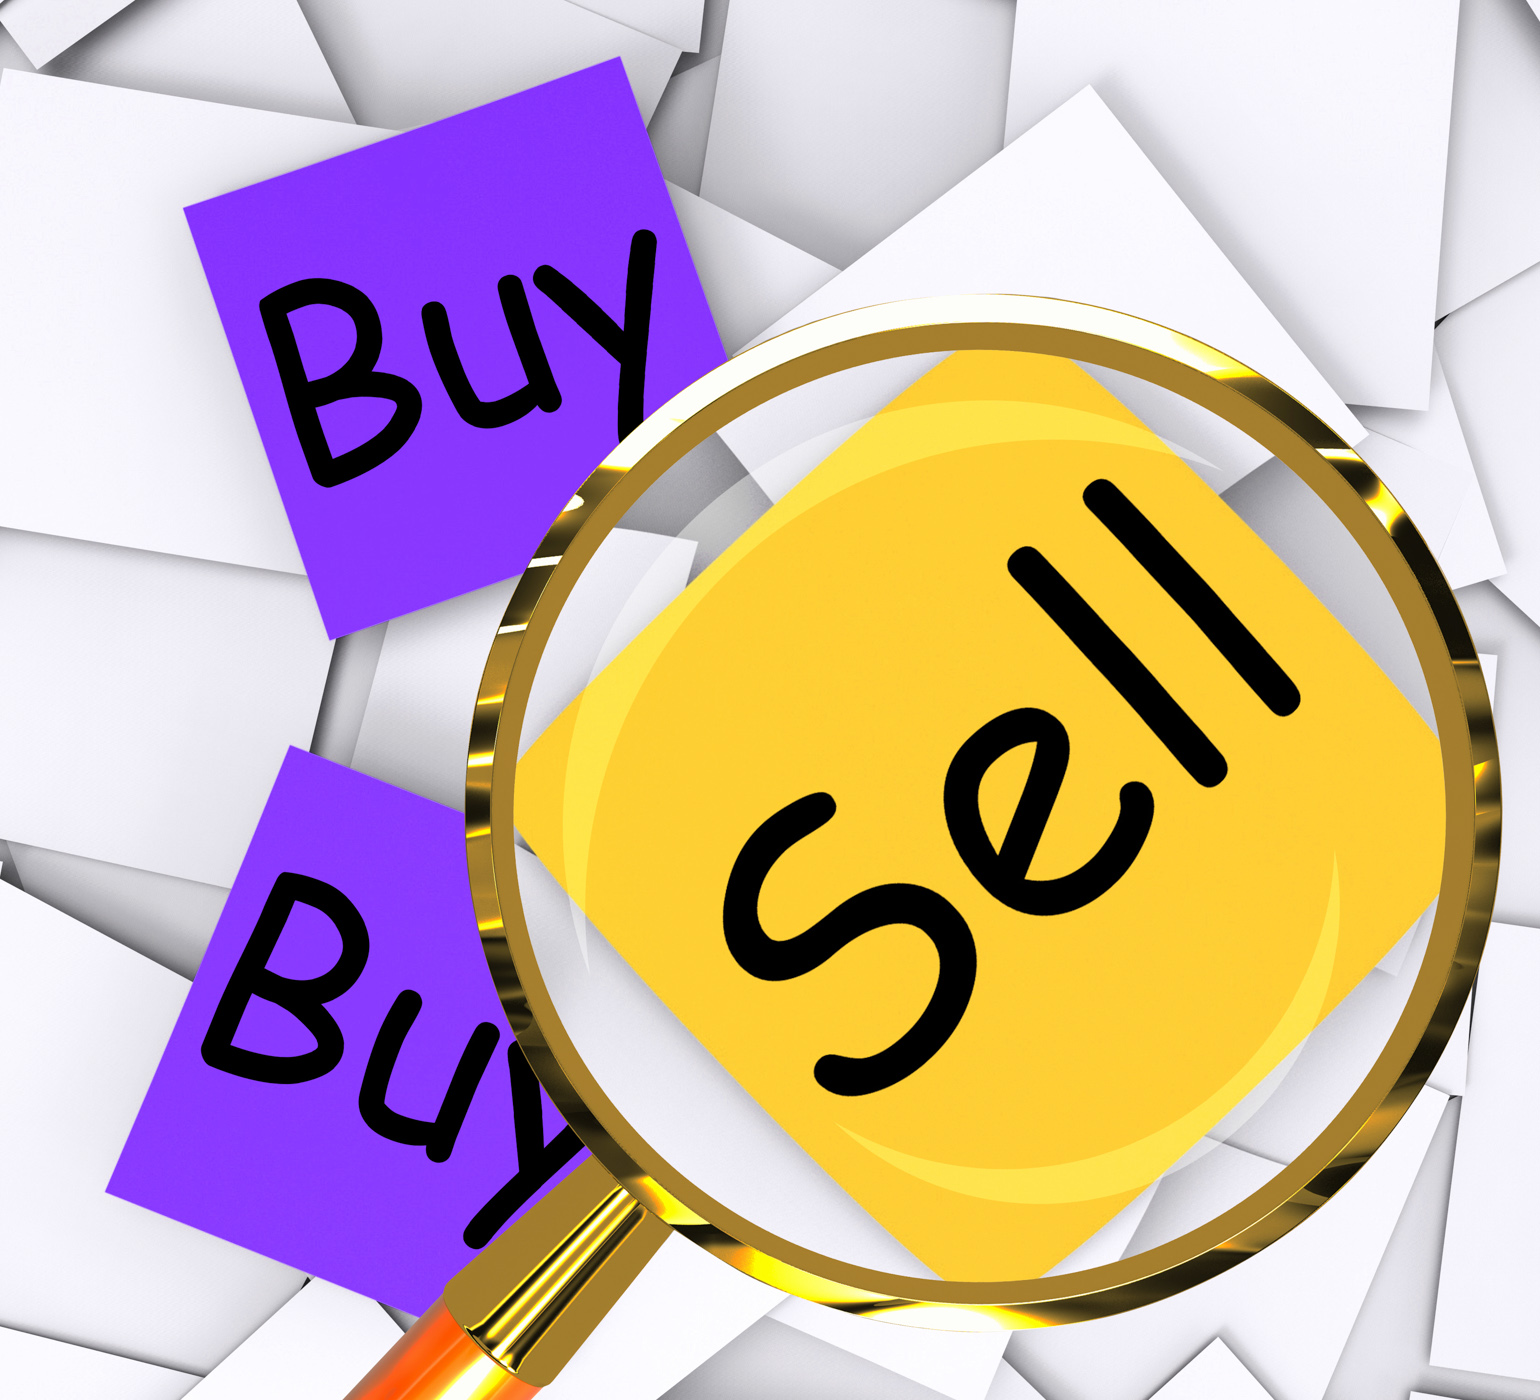 Buy Sell Post-It Papers Mean Shopping Retail And Trade, Bought, Retail, Trade, Sold, HQ Photo